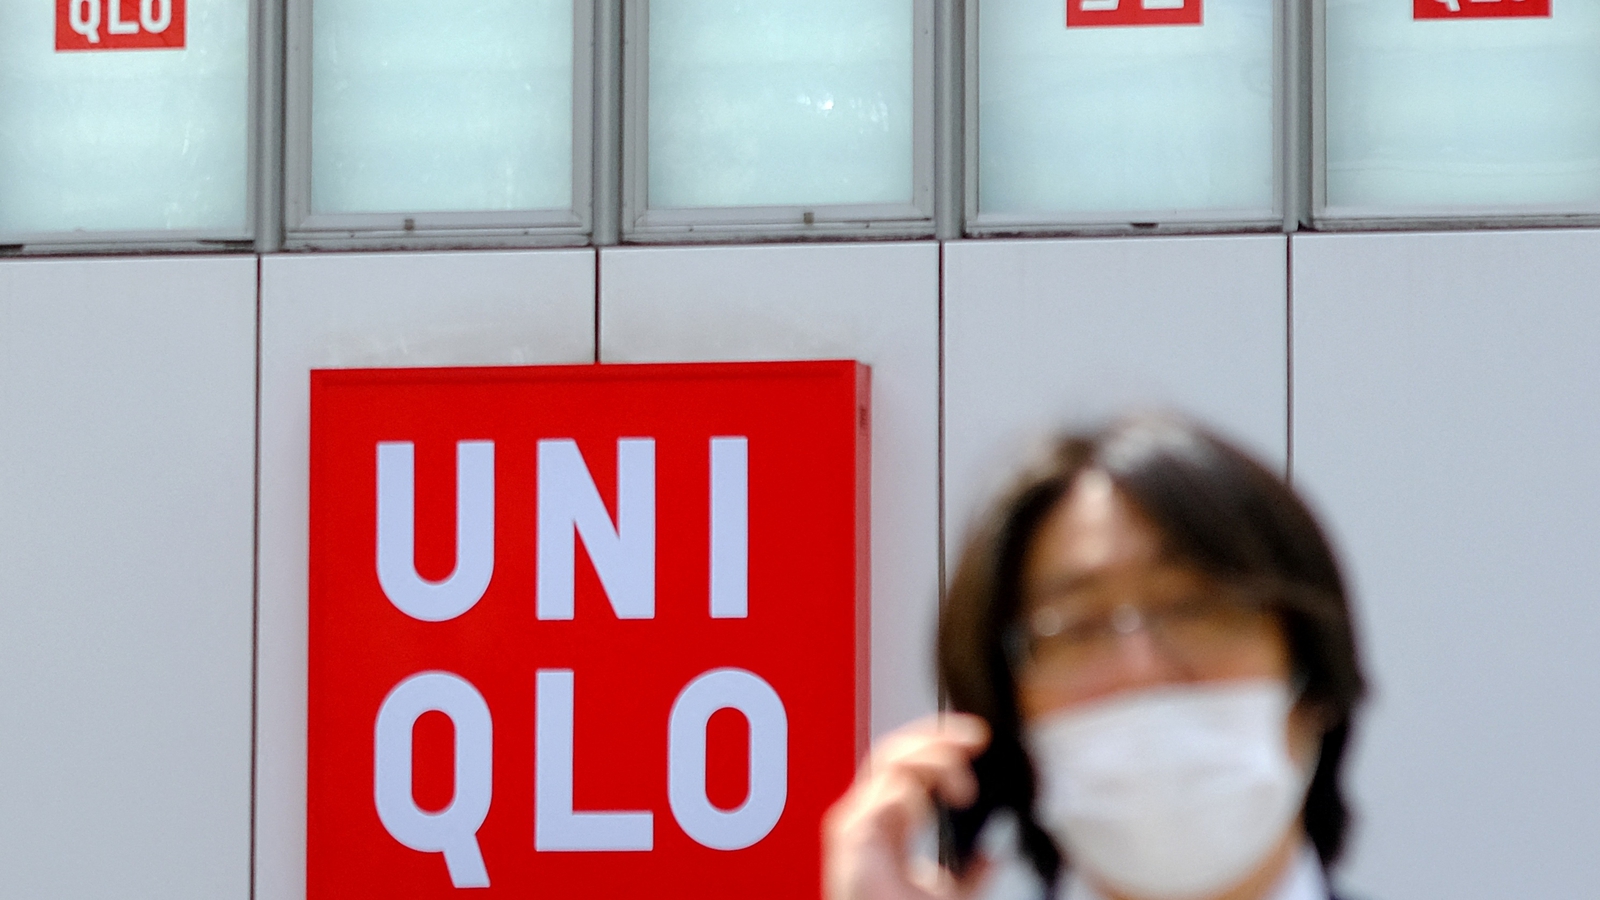 Why Uniqlos Goal Of 10 Billion In US Sales By 2020 Isnt Going To Happen